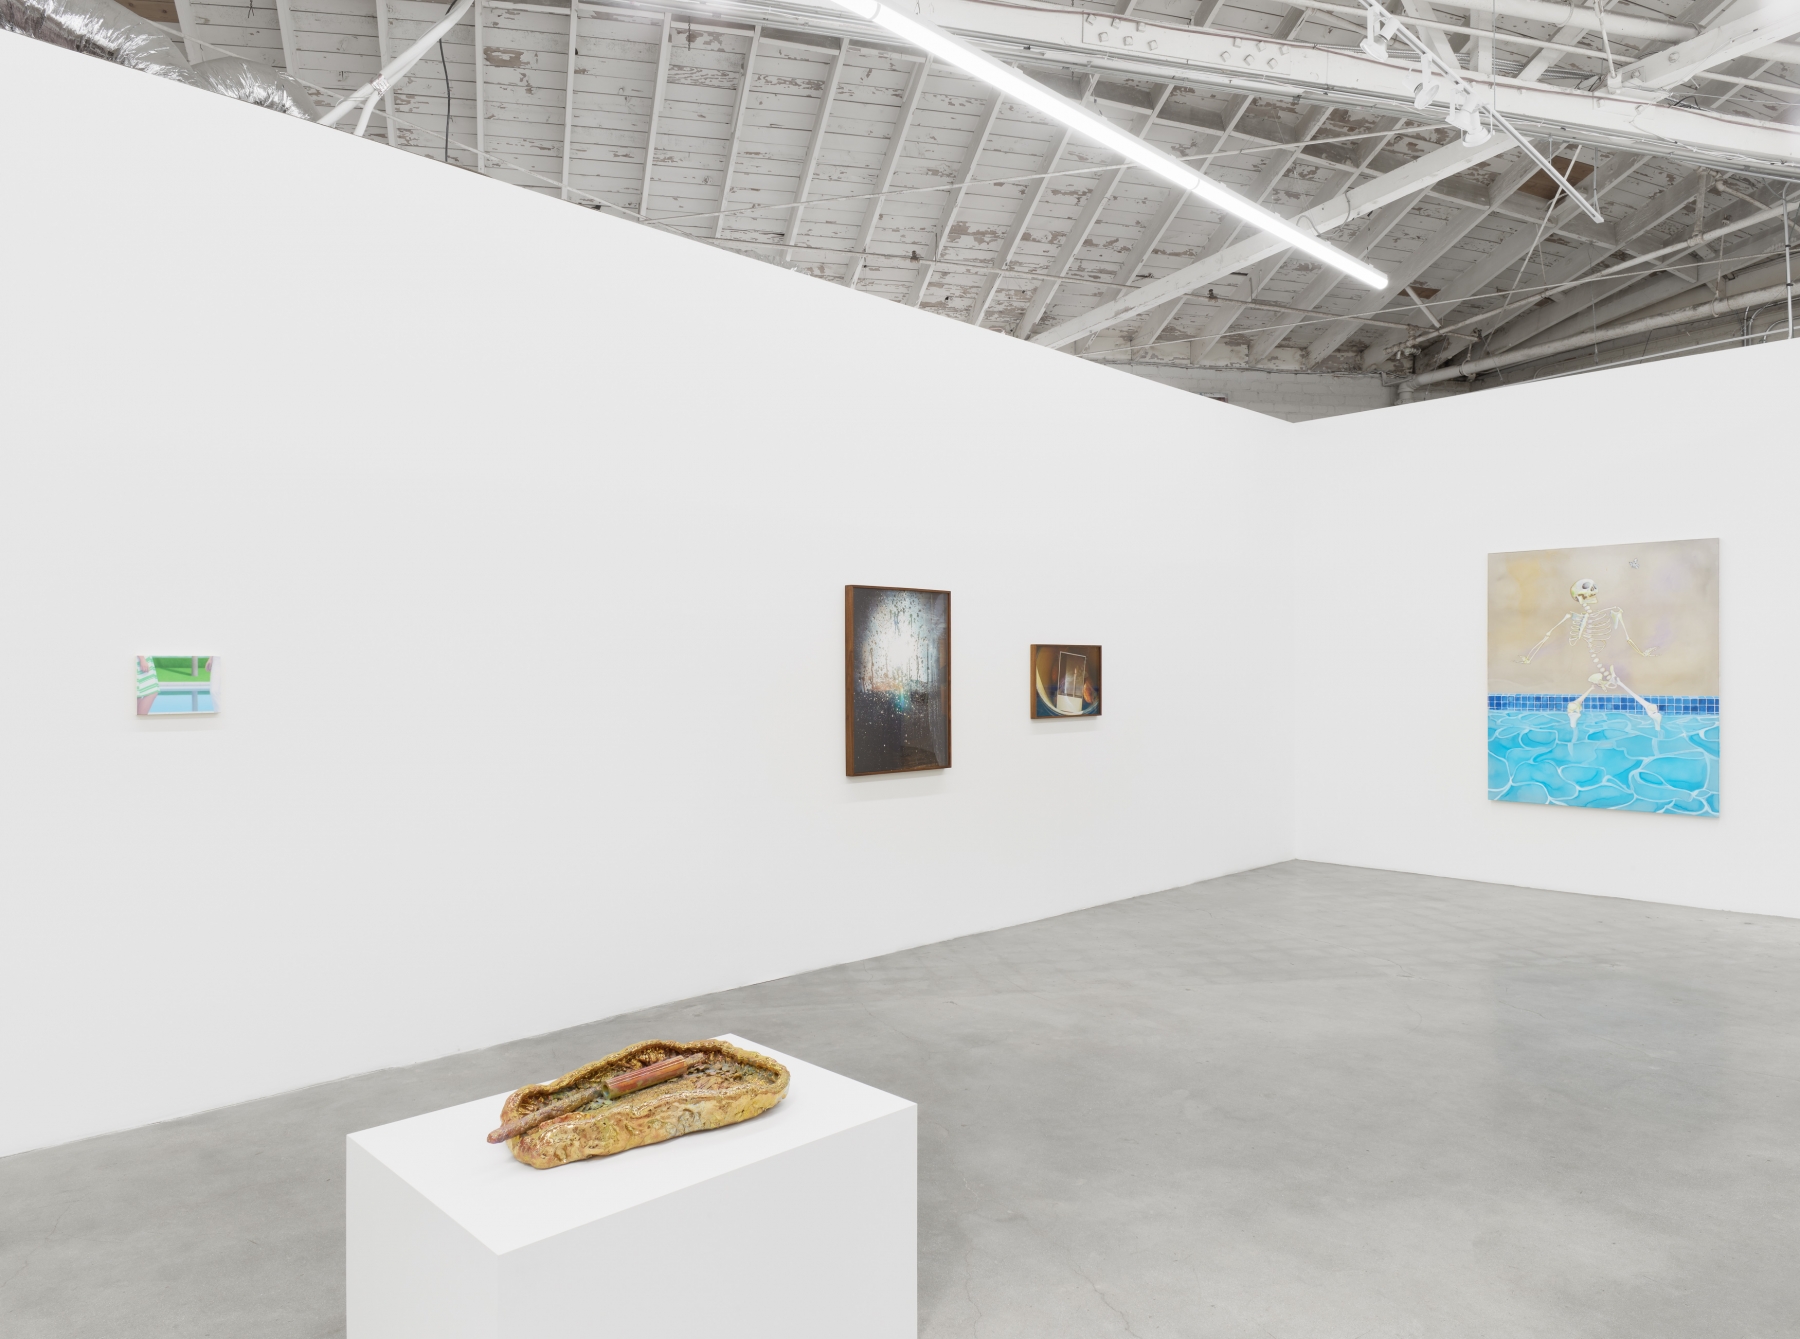 Installation view of Majeure Force, Part Two, featuring works by Ridley Howard, Sterling Ruby, Melanie Schiff, and Paul Heyer.